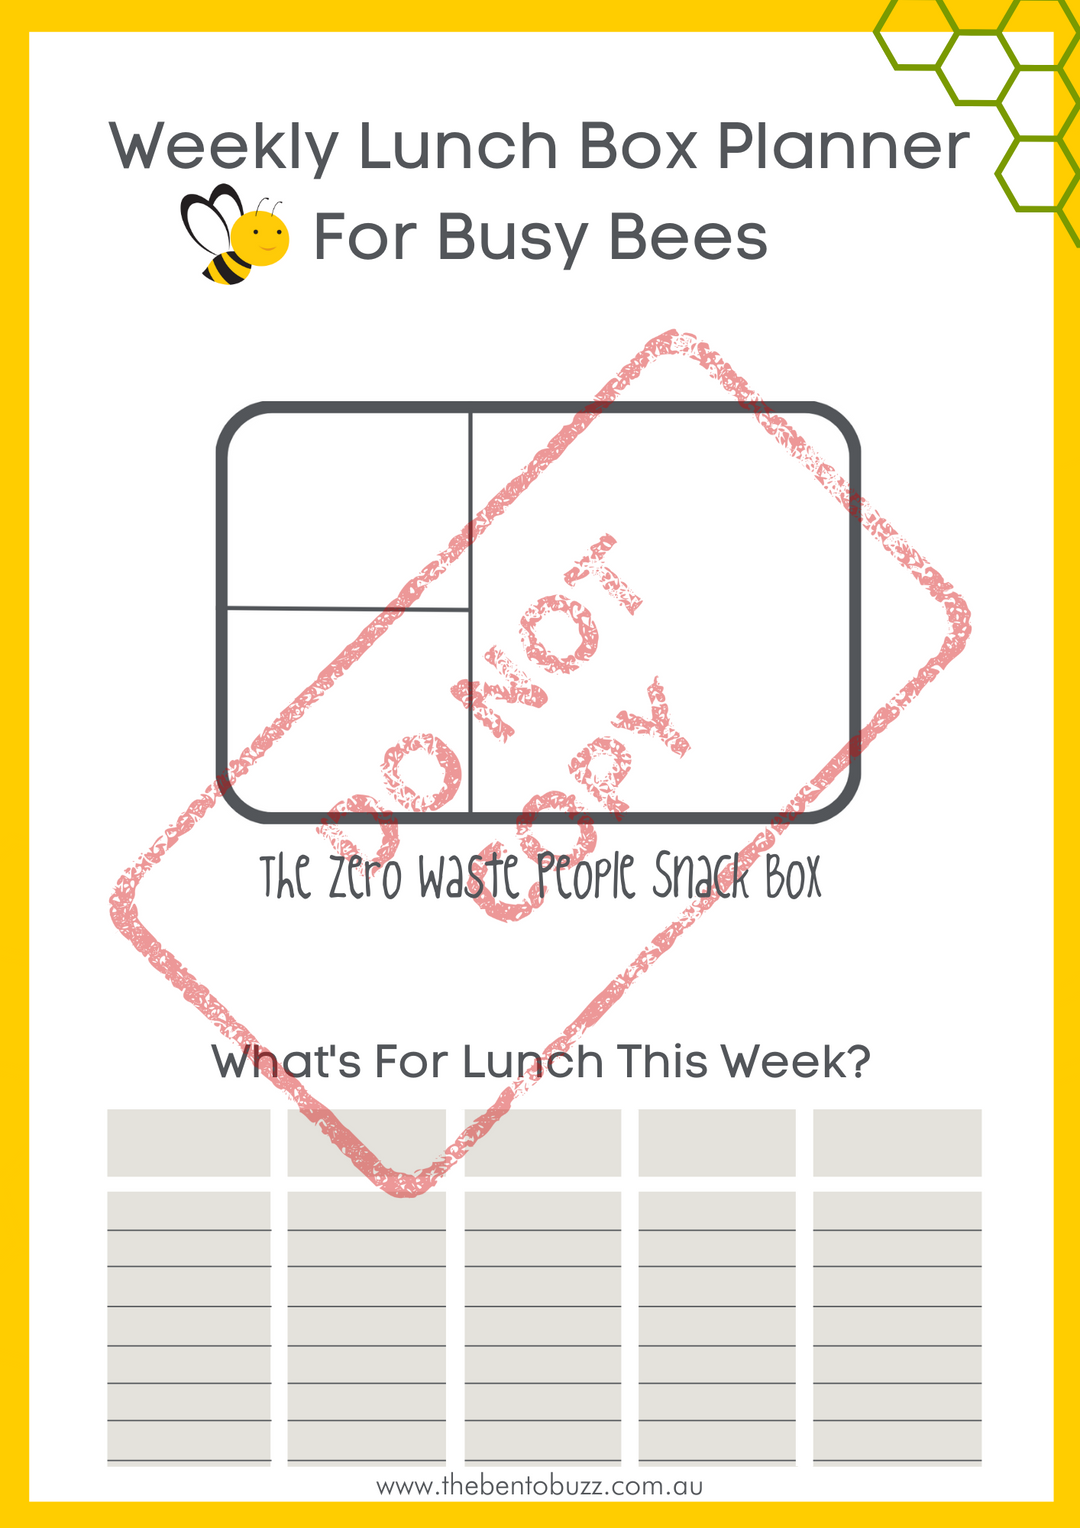 Download & Print Lunch Box Planner - The Zero Waste People Snack